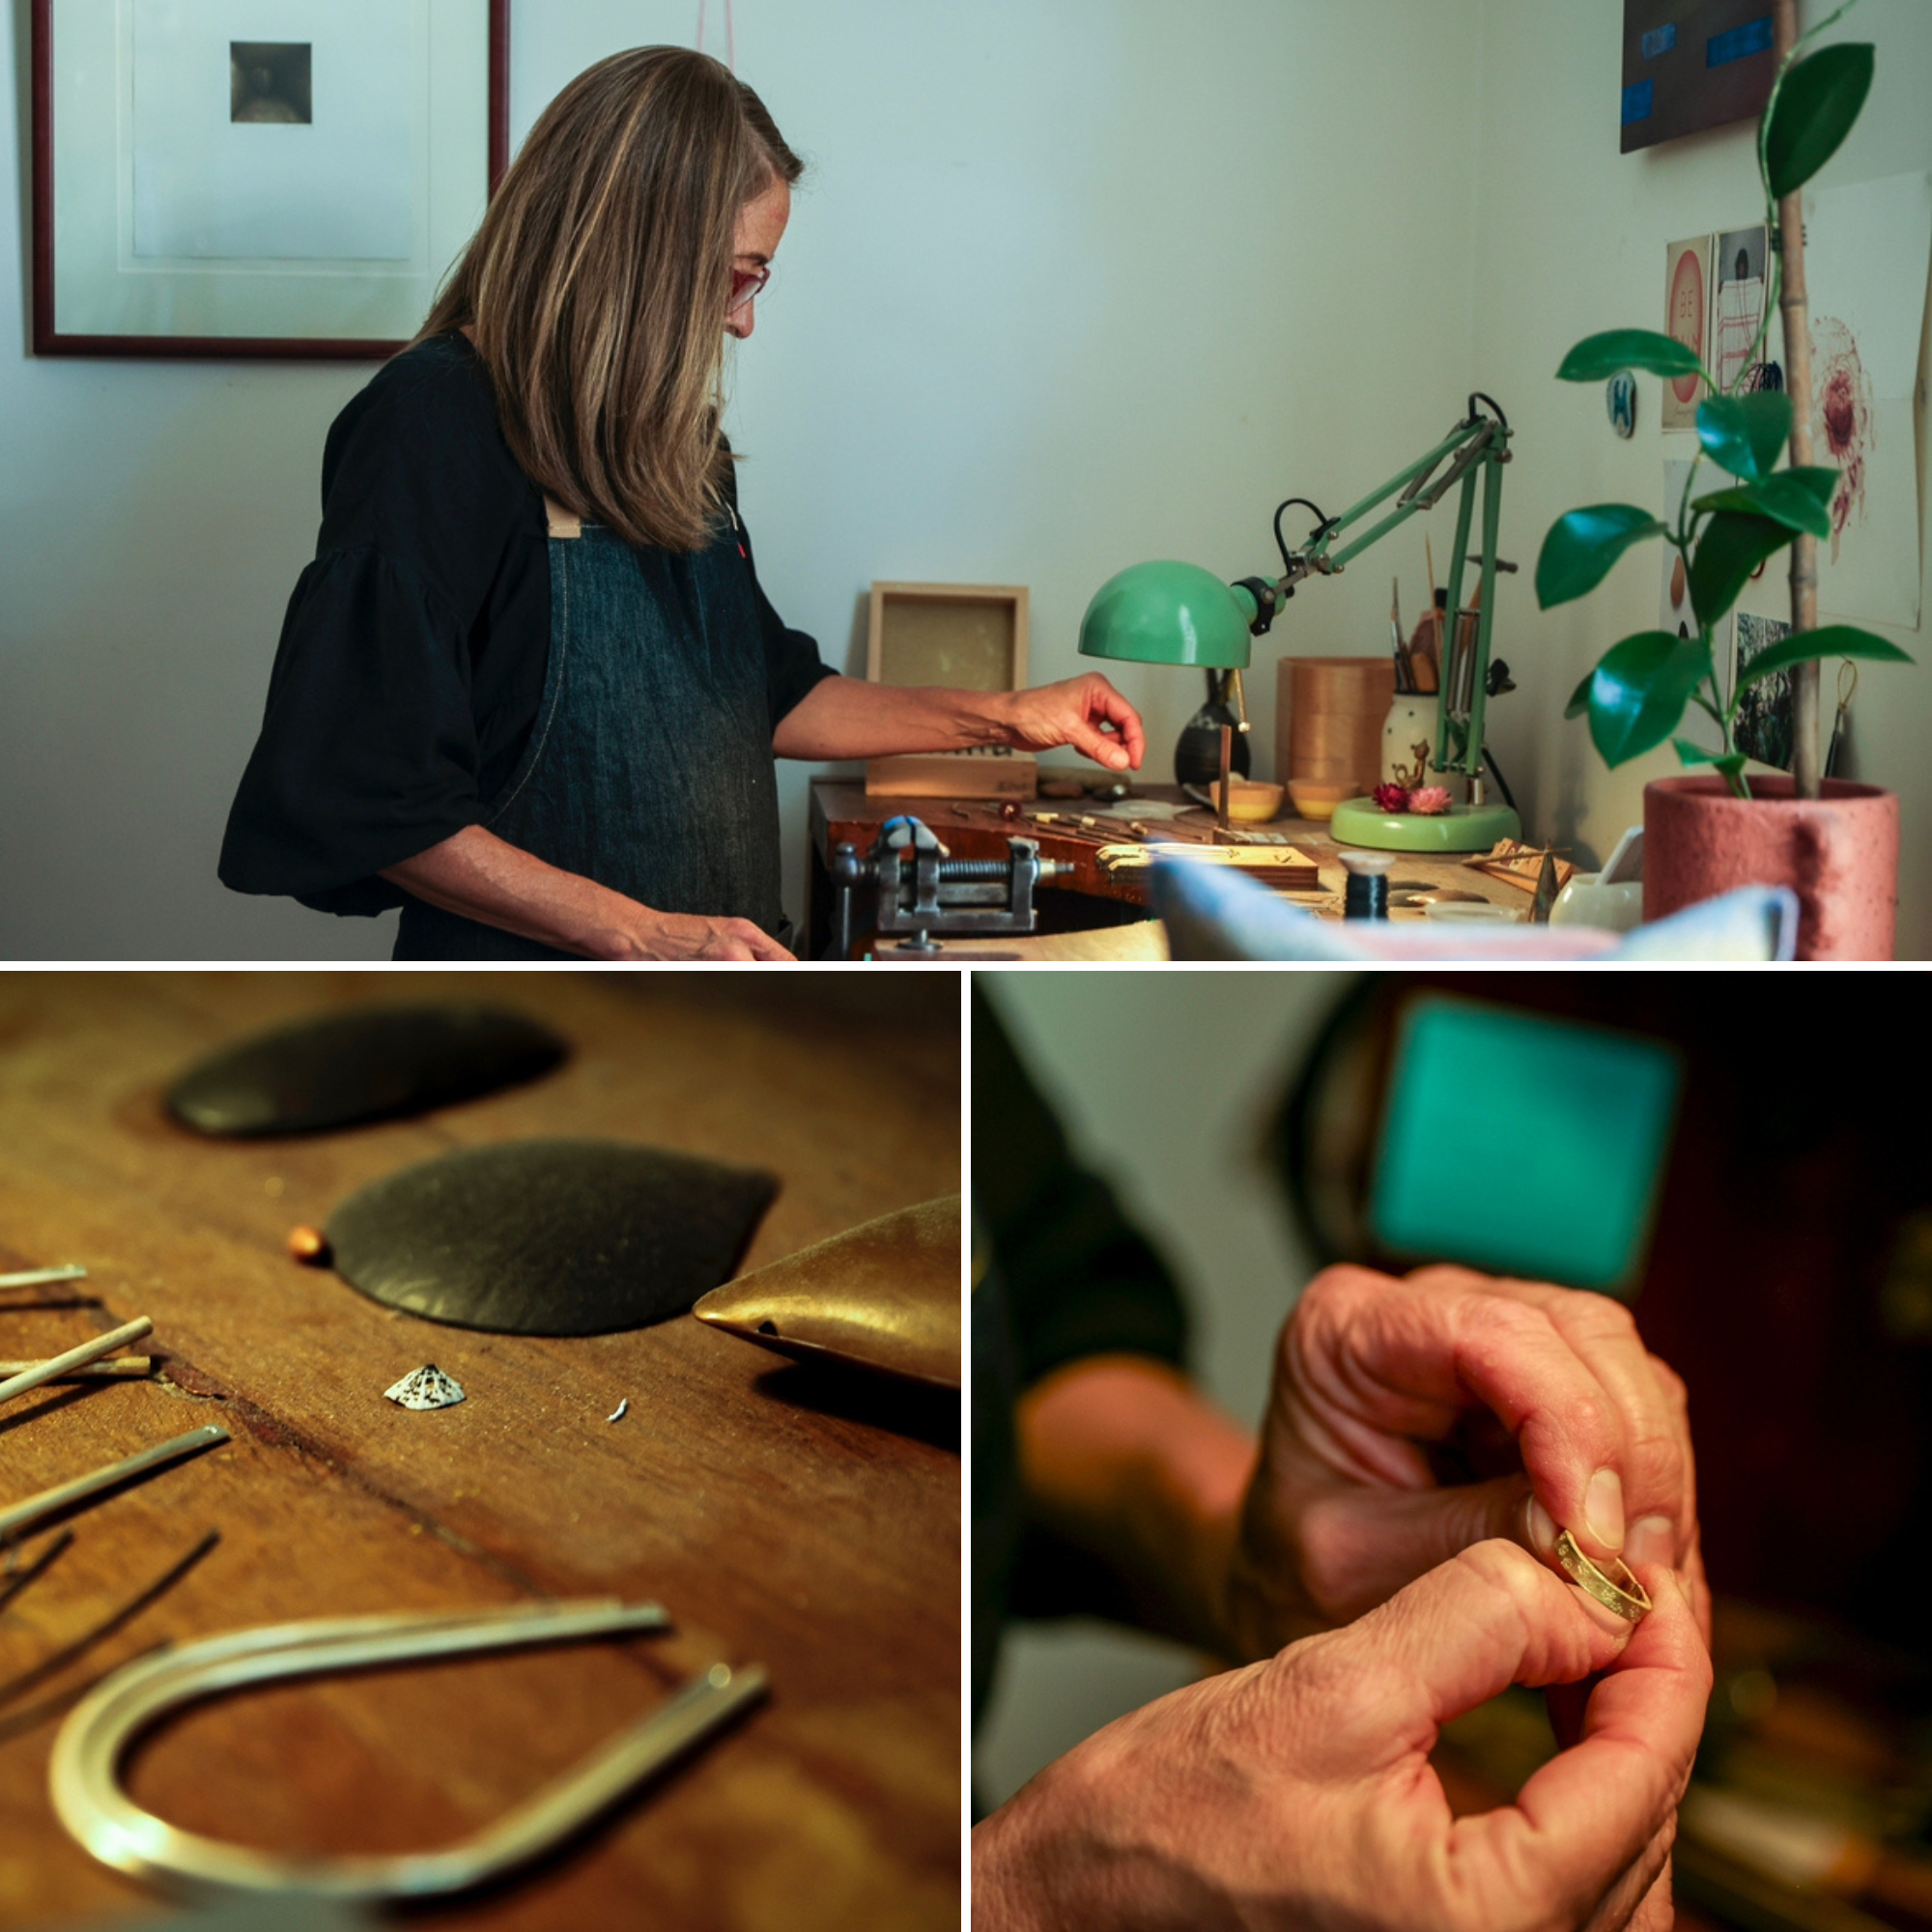 A woman with long brown hair works on jewellery under a lamp at a desk